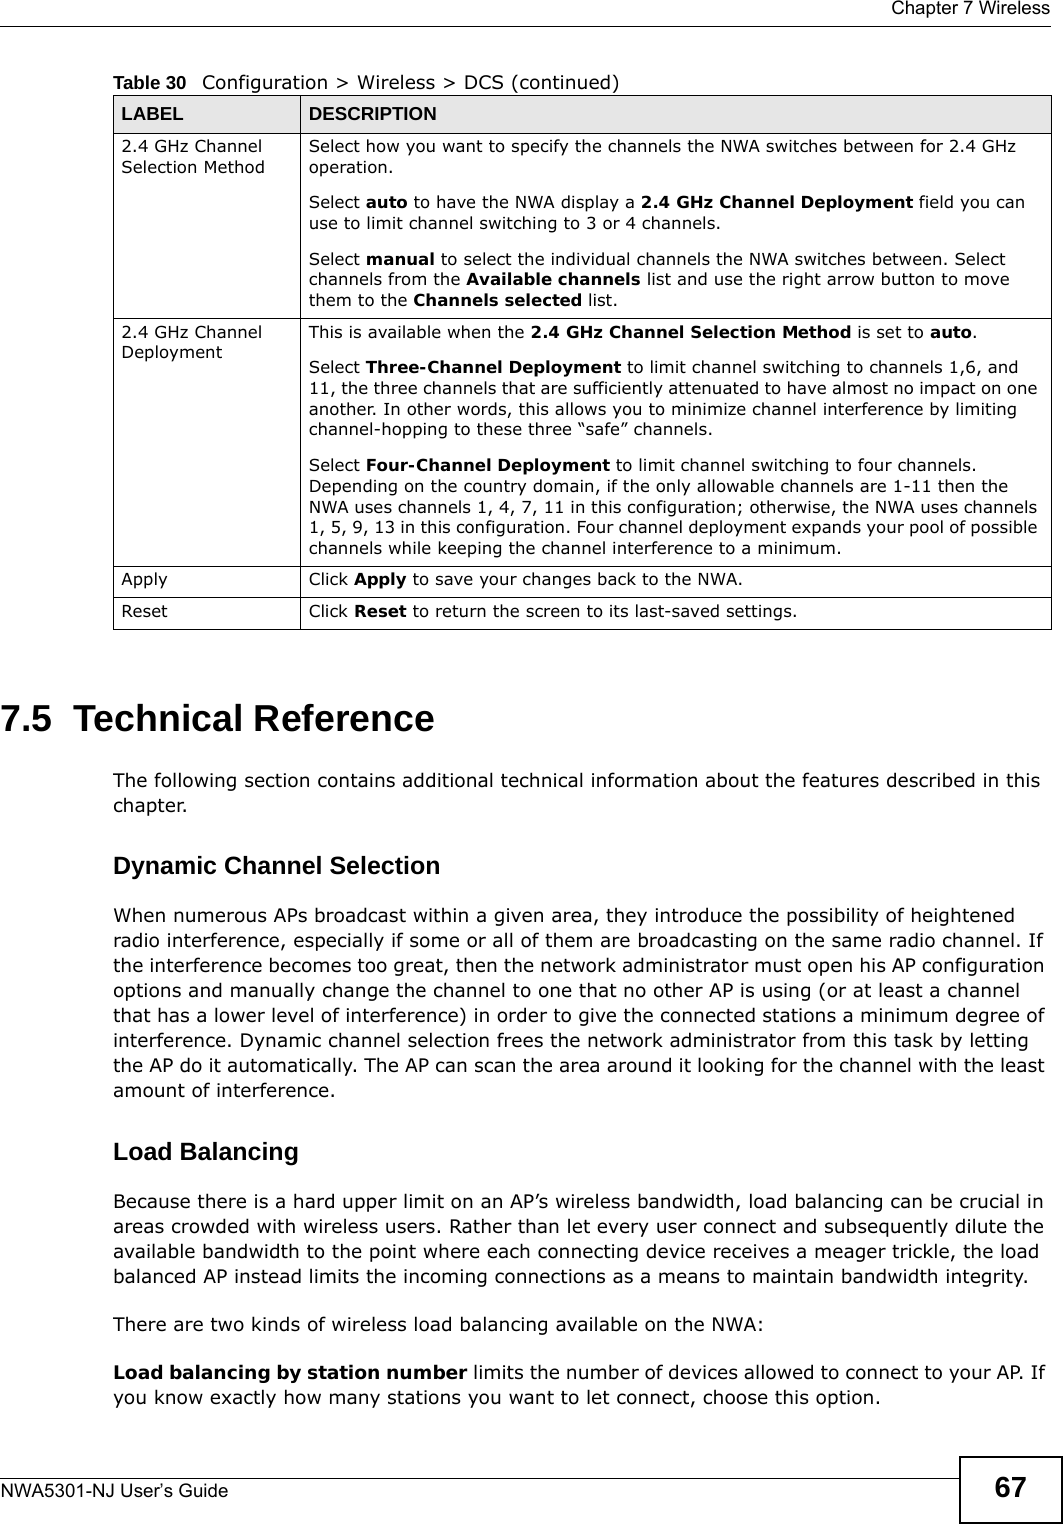  Chapter 7 WirelessNWA5301-NJ User’s Guide 677.5  Technical ReferenceThe following section contains additional technical information about the features described in this chapter.Dynamic Channel SelectionWhen numerous APs broadcast within a given area, they introduce the possibility of heightened radio interference, especially if some or all of them are broadcasting on the same radio channel. If the interference becomes too great, then the network administrator must open his AP configuration options and manually change the channel to one that no other AP is using (or at least a channel that has a lower level of interference) in order to give the connected stations a minimum degree of interference. Dynamic channel selection frees the network administrator from this task by letting the AP do it automatically. The AP can scan the area around it looking for the channel with the least amount of interference.Load BalancingBecause there is a hard upper limit on an AP’s wireless bandwidth, load balancing can be crucial in areas crowded with wireless users. Rather than let every user connect and subsequently dilute the available bandwidth to the point where each connecting device receives a meager trickle, the load balanced AP instead limits the incoming connections as a means to maintain bandwidth integrity.There are two kinds of wireless load balancing available on the NWA: Load balancing by station number limits the number of devices allowed to connect to your AP. If you know exactly how many stations you want to let connect, choose this option.2.4 GHz Channel Selection MethodSelect how you want to specify the channels the NWA switches between for 2.4 GHz operation.Select auto to have the NWA display a 2.4 GHz Channel Deployment field you can use to limit channel switching to 3 or 4 channels.Select manual to select the individual channels the NWA switches between. Select channels from the Available channels list and use the right arrow button to move them to the Channels selected list. 2.4 GHz Channel DeploymentThis is available when the 2.4 GHz Channel Selection Method is set to auto.Select Three-Channel Deployment to limit channel switching to channels 1,6, and 11, the three channels that are sufficiently attenuated to have almost no impact on one another. In other words, this allows you to minimize channel interference by limiting channel-hopping to these three “safe” channels.Select Four-Channel Deployment to limit channel switching to four channels. Depending on the country domain, if the only allowable channels are 1-11 then the NWA uses channels 1, 4, 7, 11 in this configuration; otherwise, the NWA uses channels 1, 5, 9, 13 in this configuration. Four channel deployment expands your pool of possible channels while keeping the channel interference to a minimum.Apply Click Apply to save your changes back to the NWA.Reset Click Reset to return the screen to its last-saved settings. Table 30   Configuration &gt; Wireless &gt; DCS (continued)LABEL  DESCRIPTION